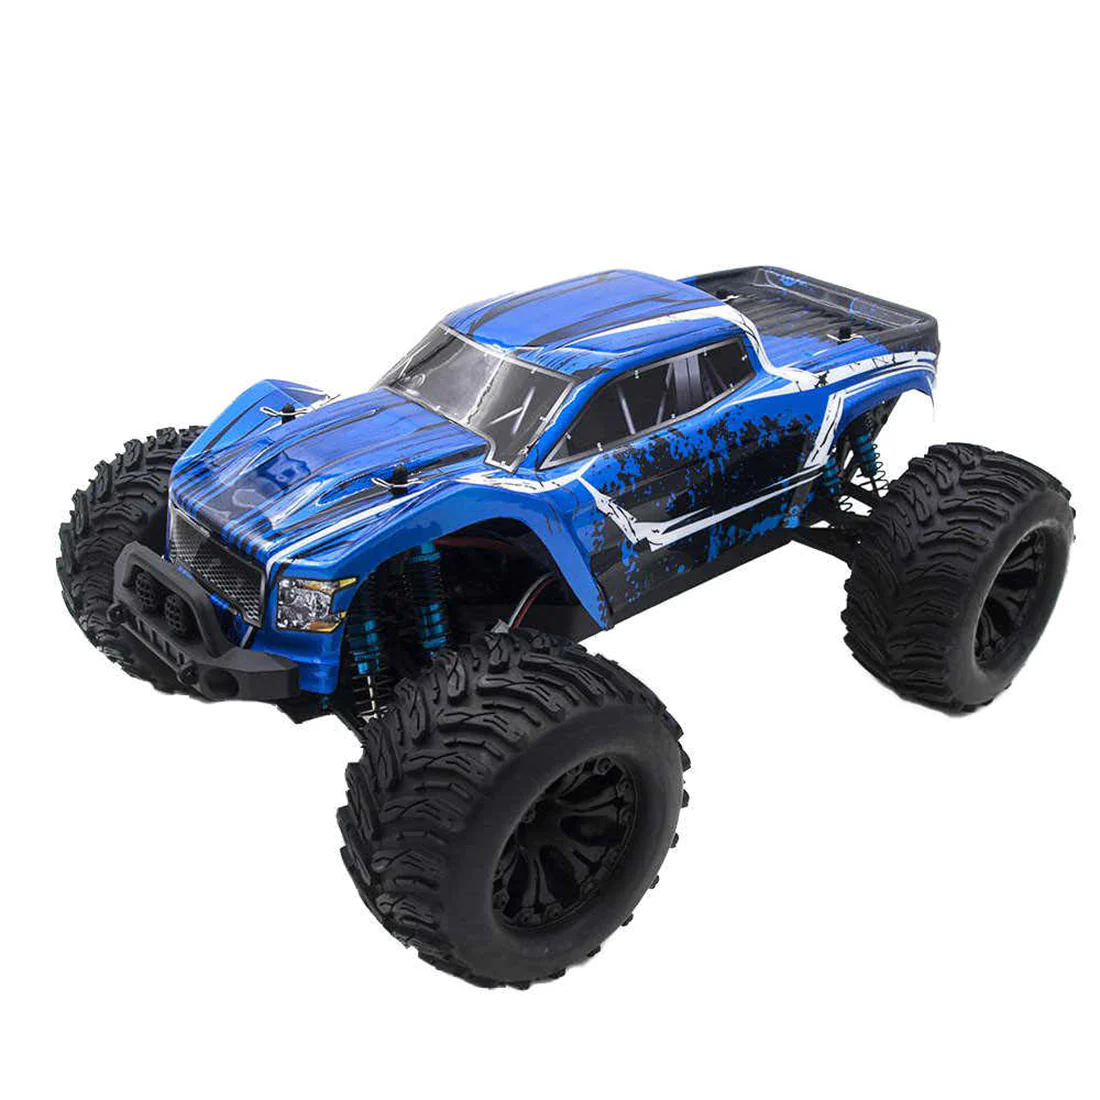 HSP 94701PRO 1:10 4WD 2.4G RTR RC Monster Truck 4WD Electric Brushless